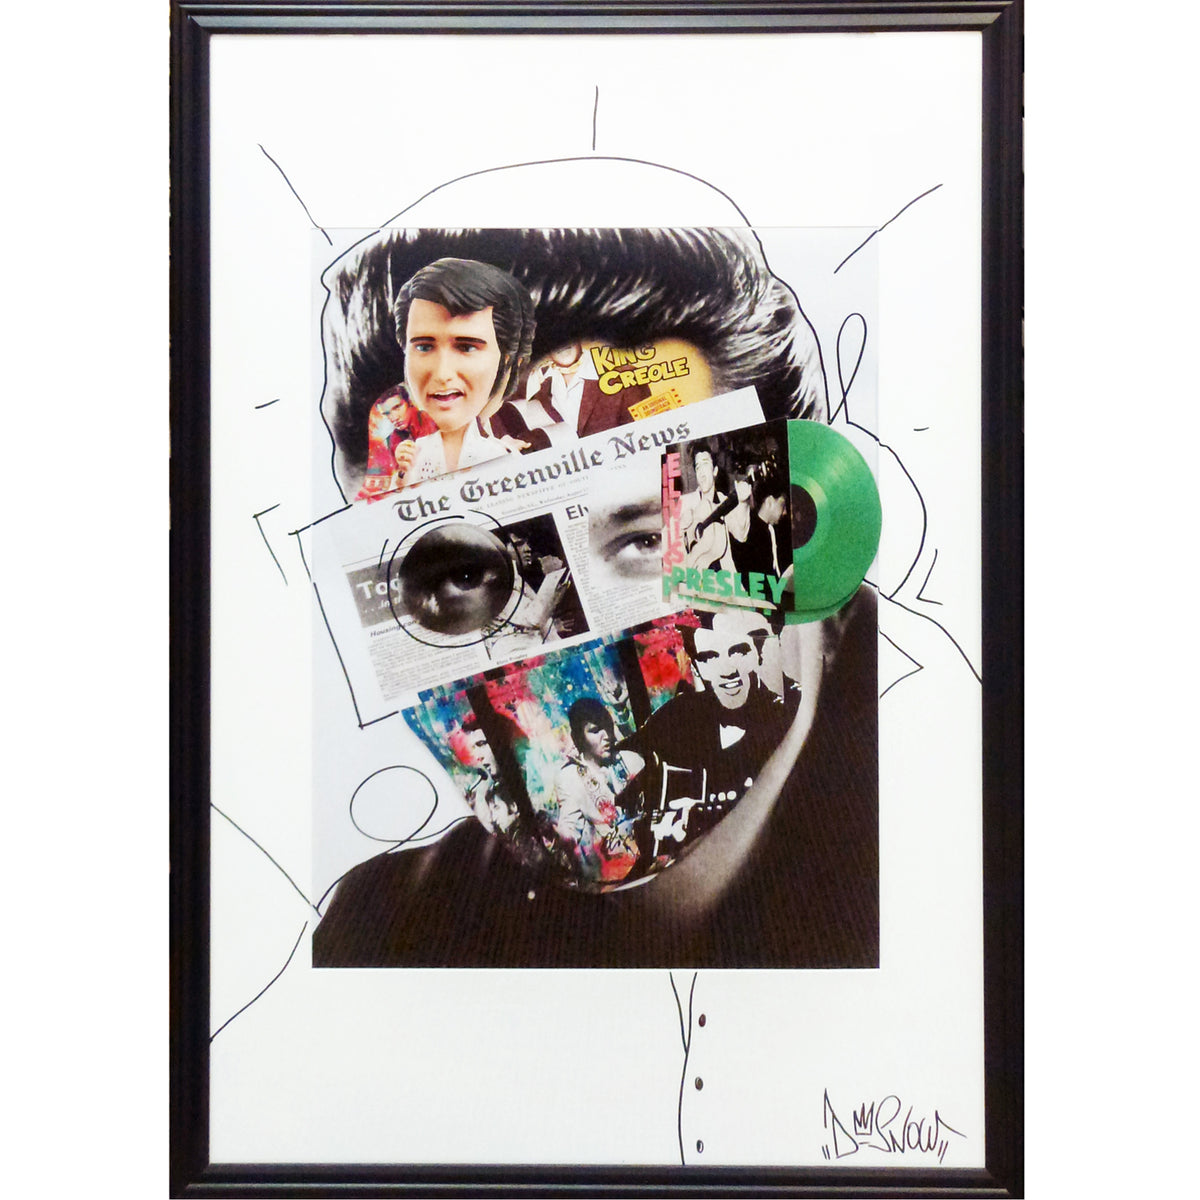 Diogo Neves -  Elvis 36" x 26"